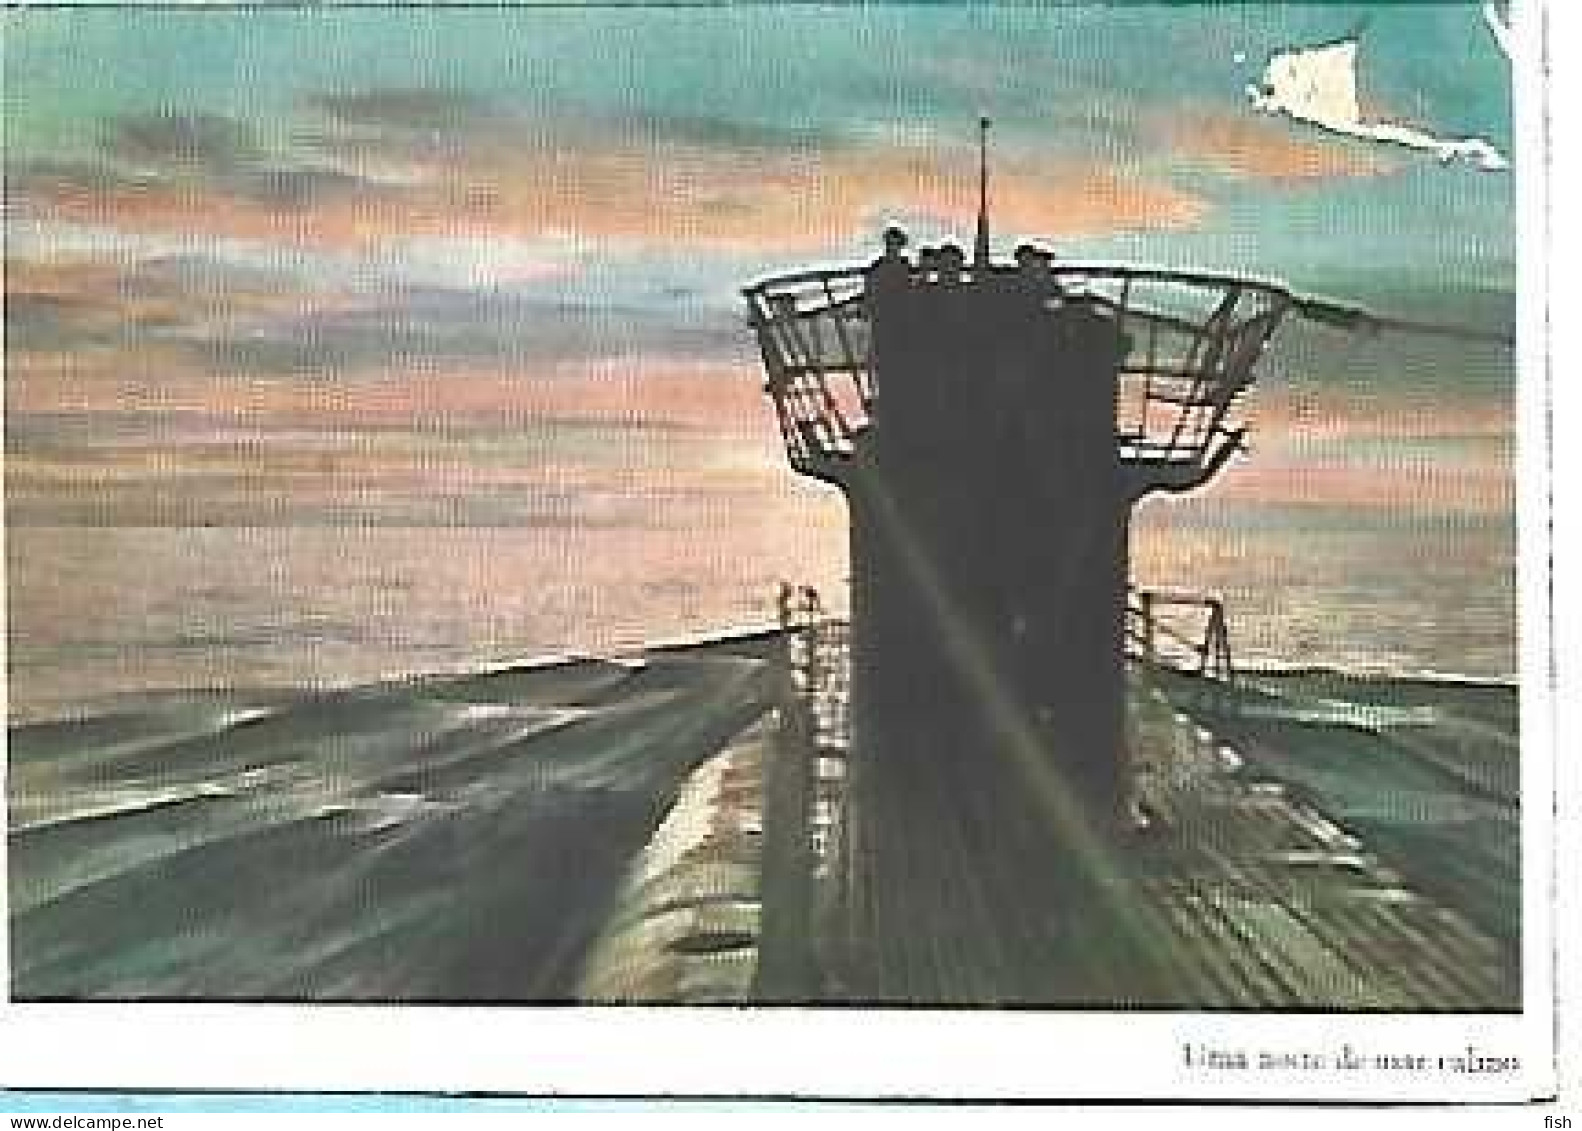 Portugal & Postal, A Night At Calm Sea, German Submarine, Photo By War Reporter P.K Jacobsen (3) - Submarines